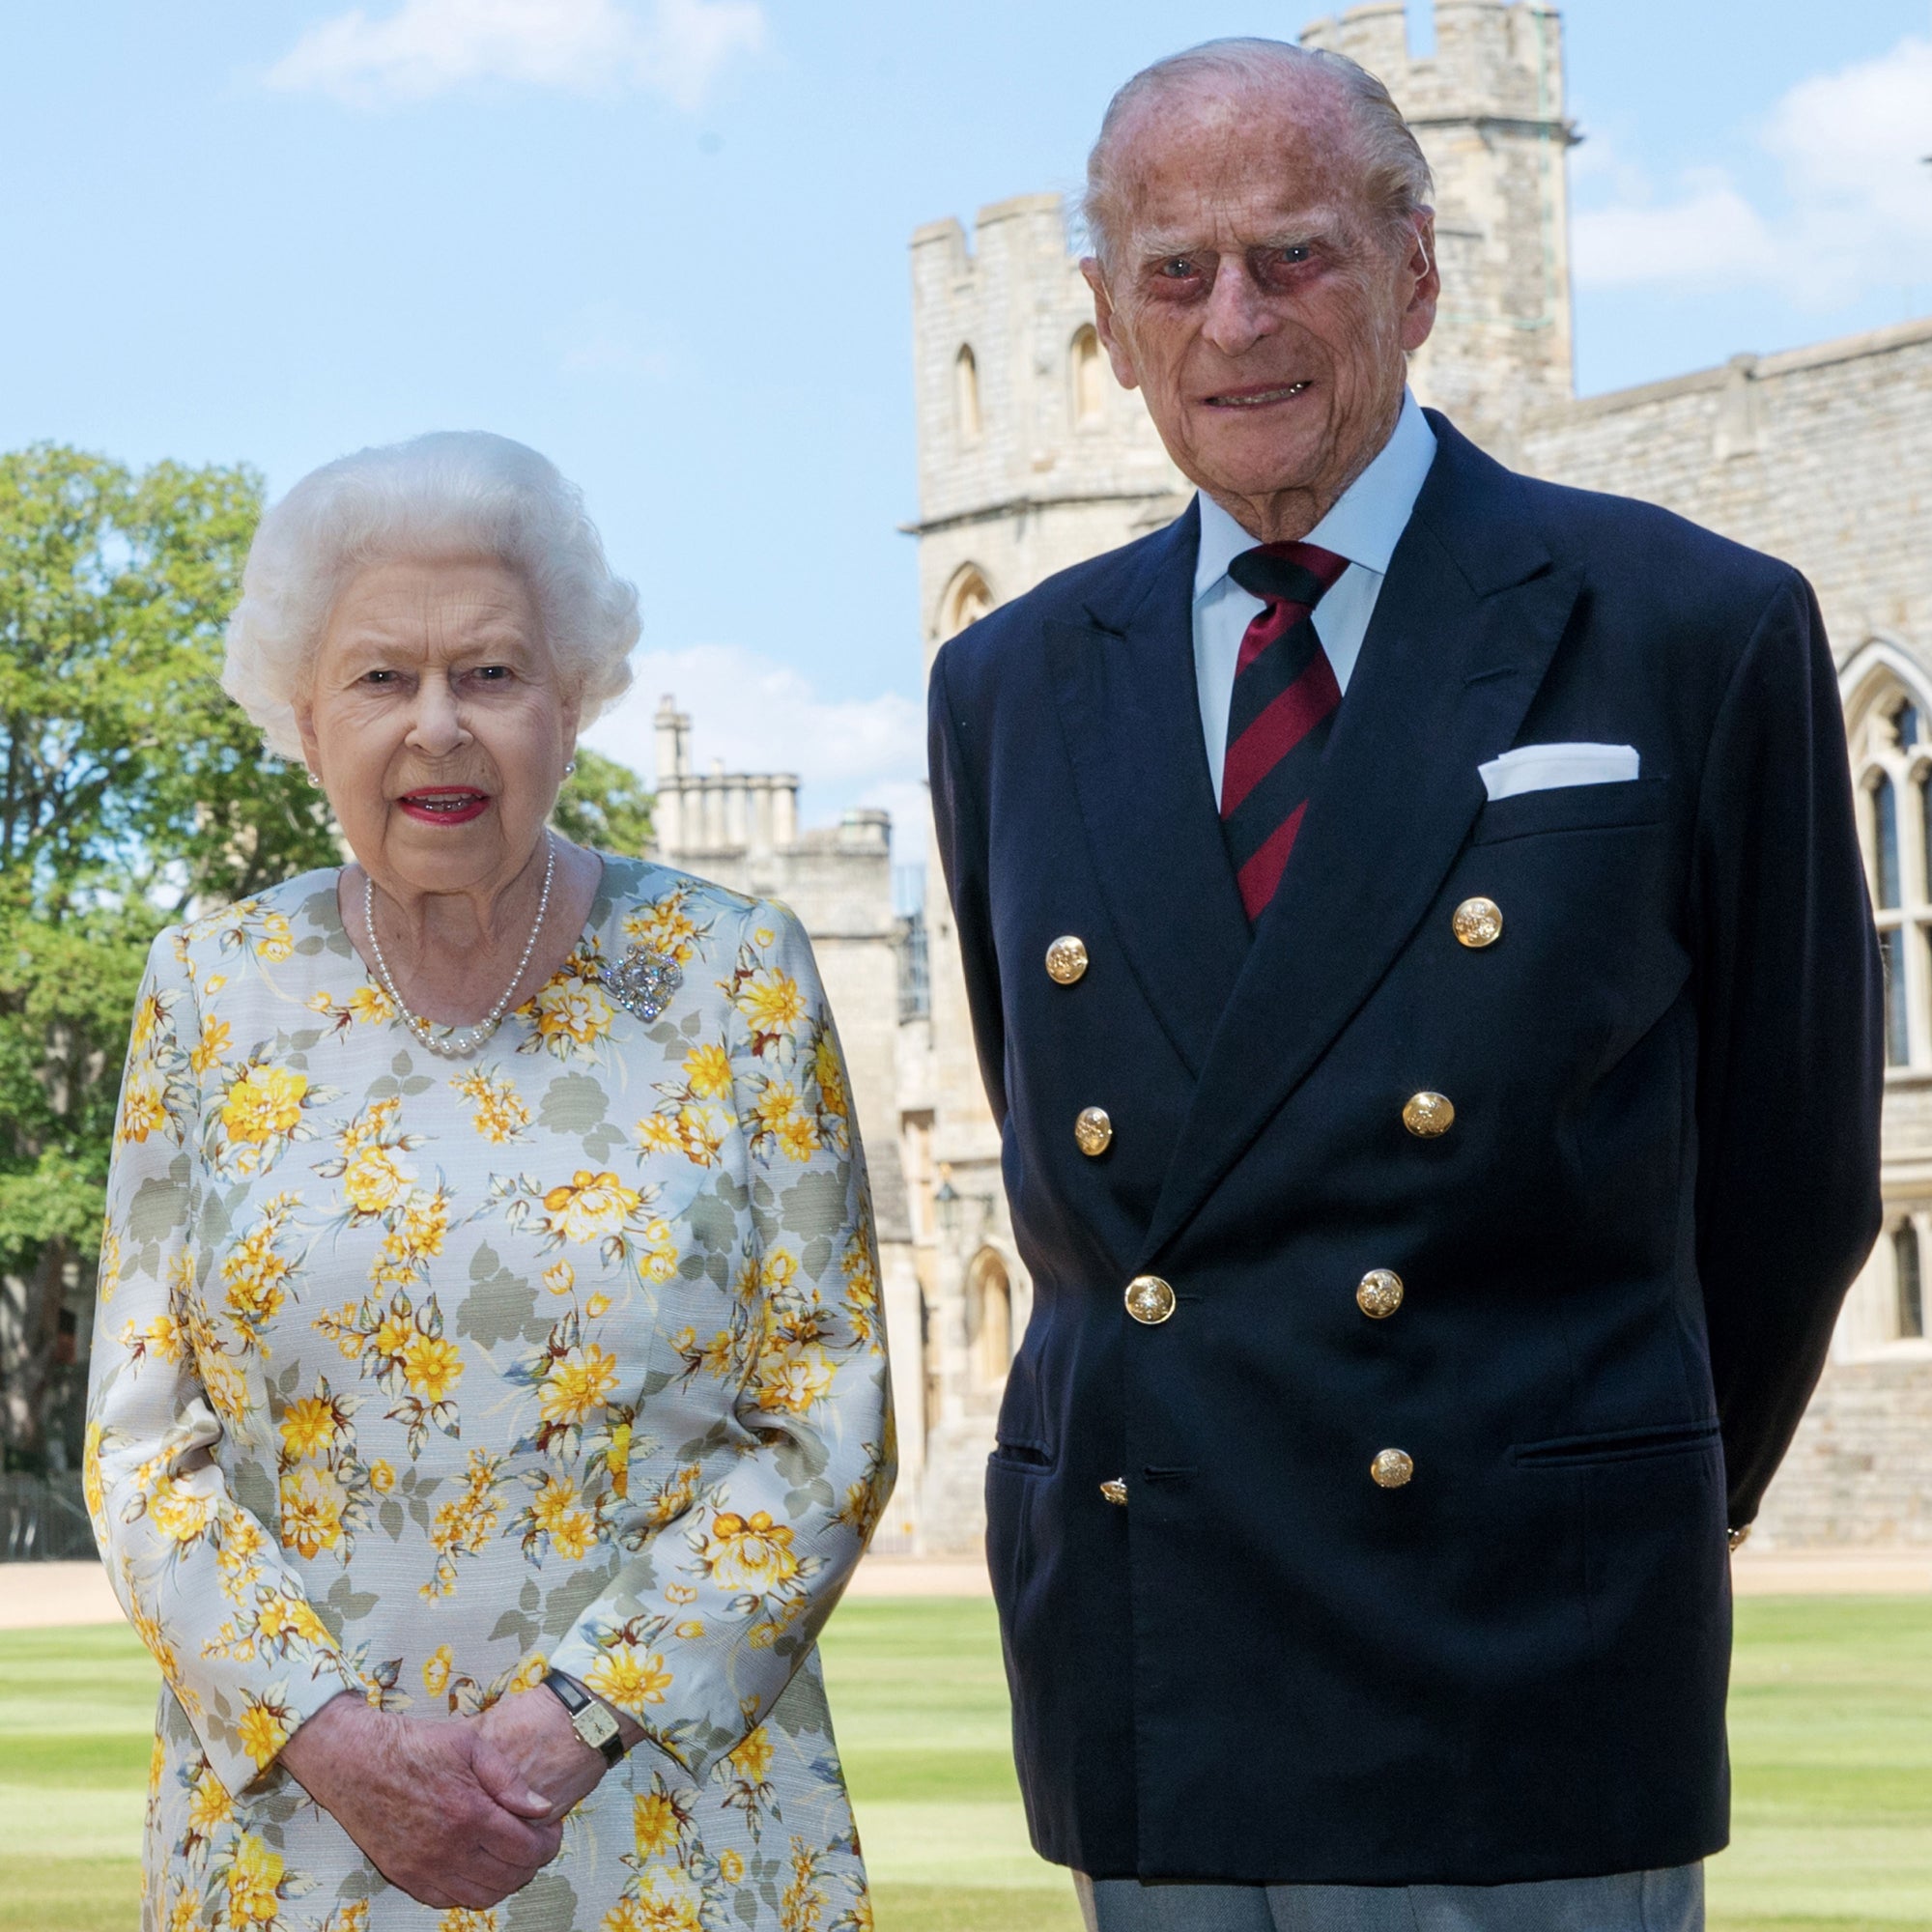 The Queen and the Duke of Edinburgh pictured at Windsor Castle in 2020 (Steve Parsons/PA)